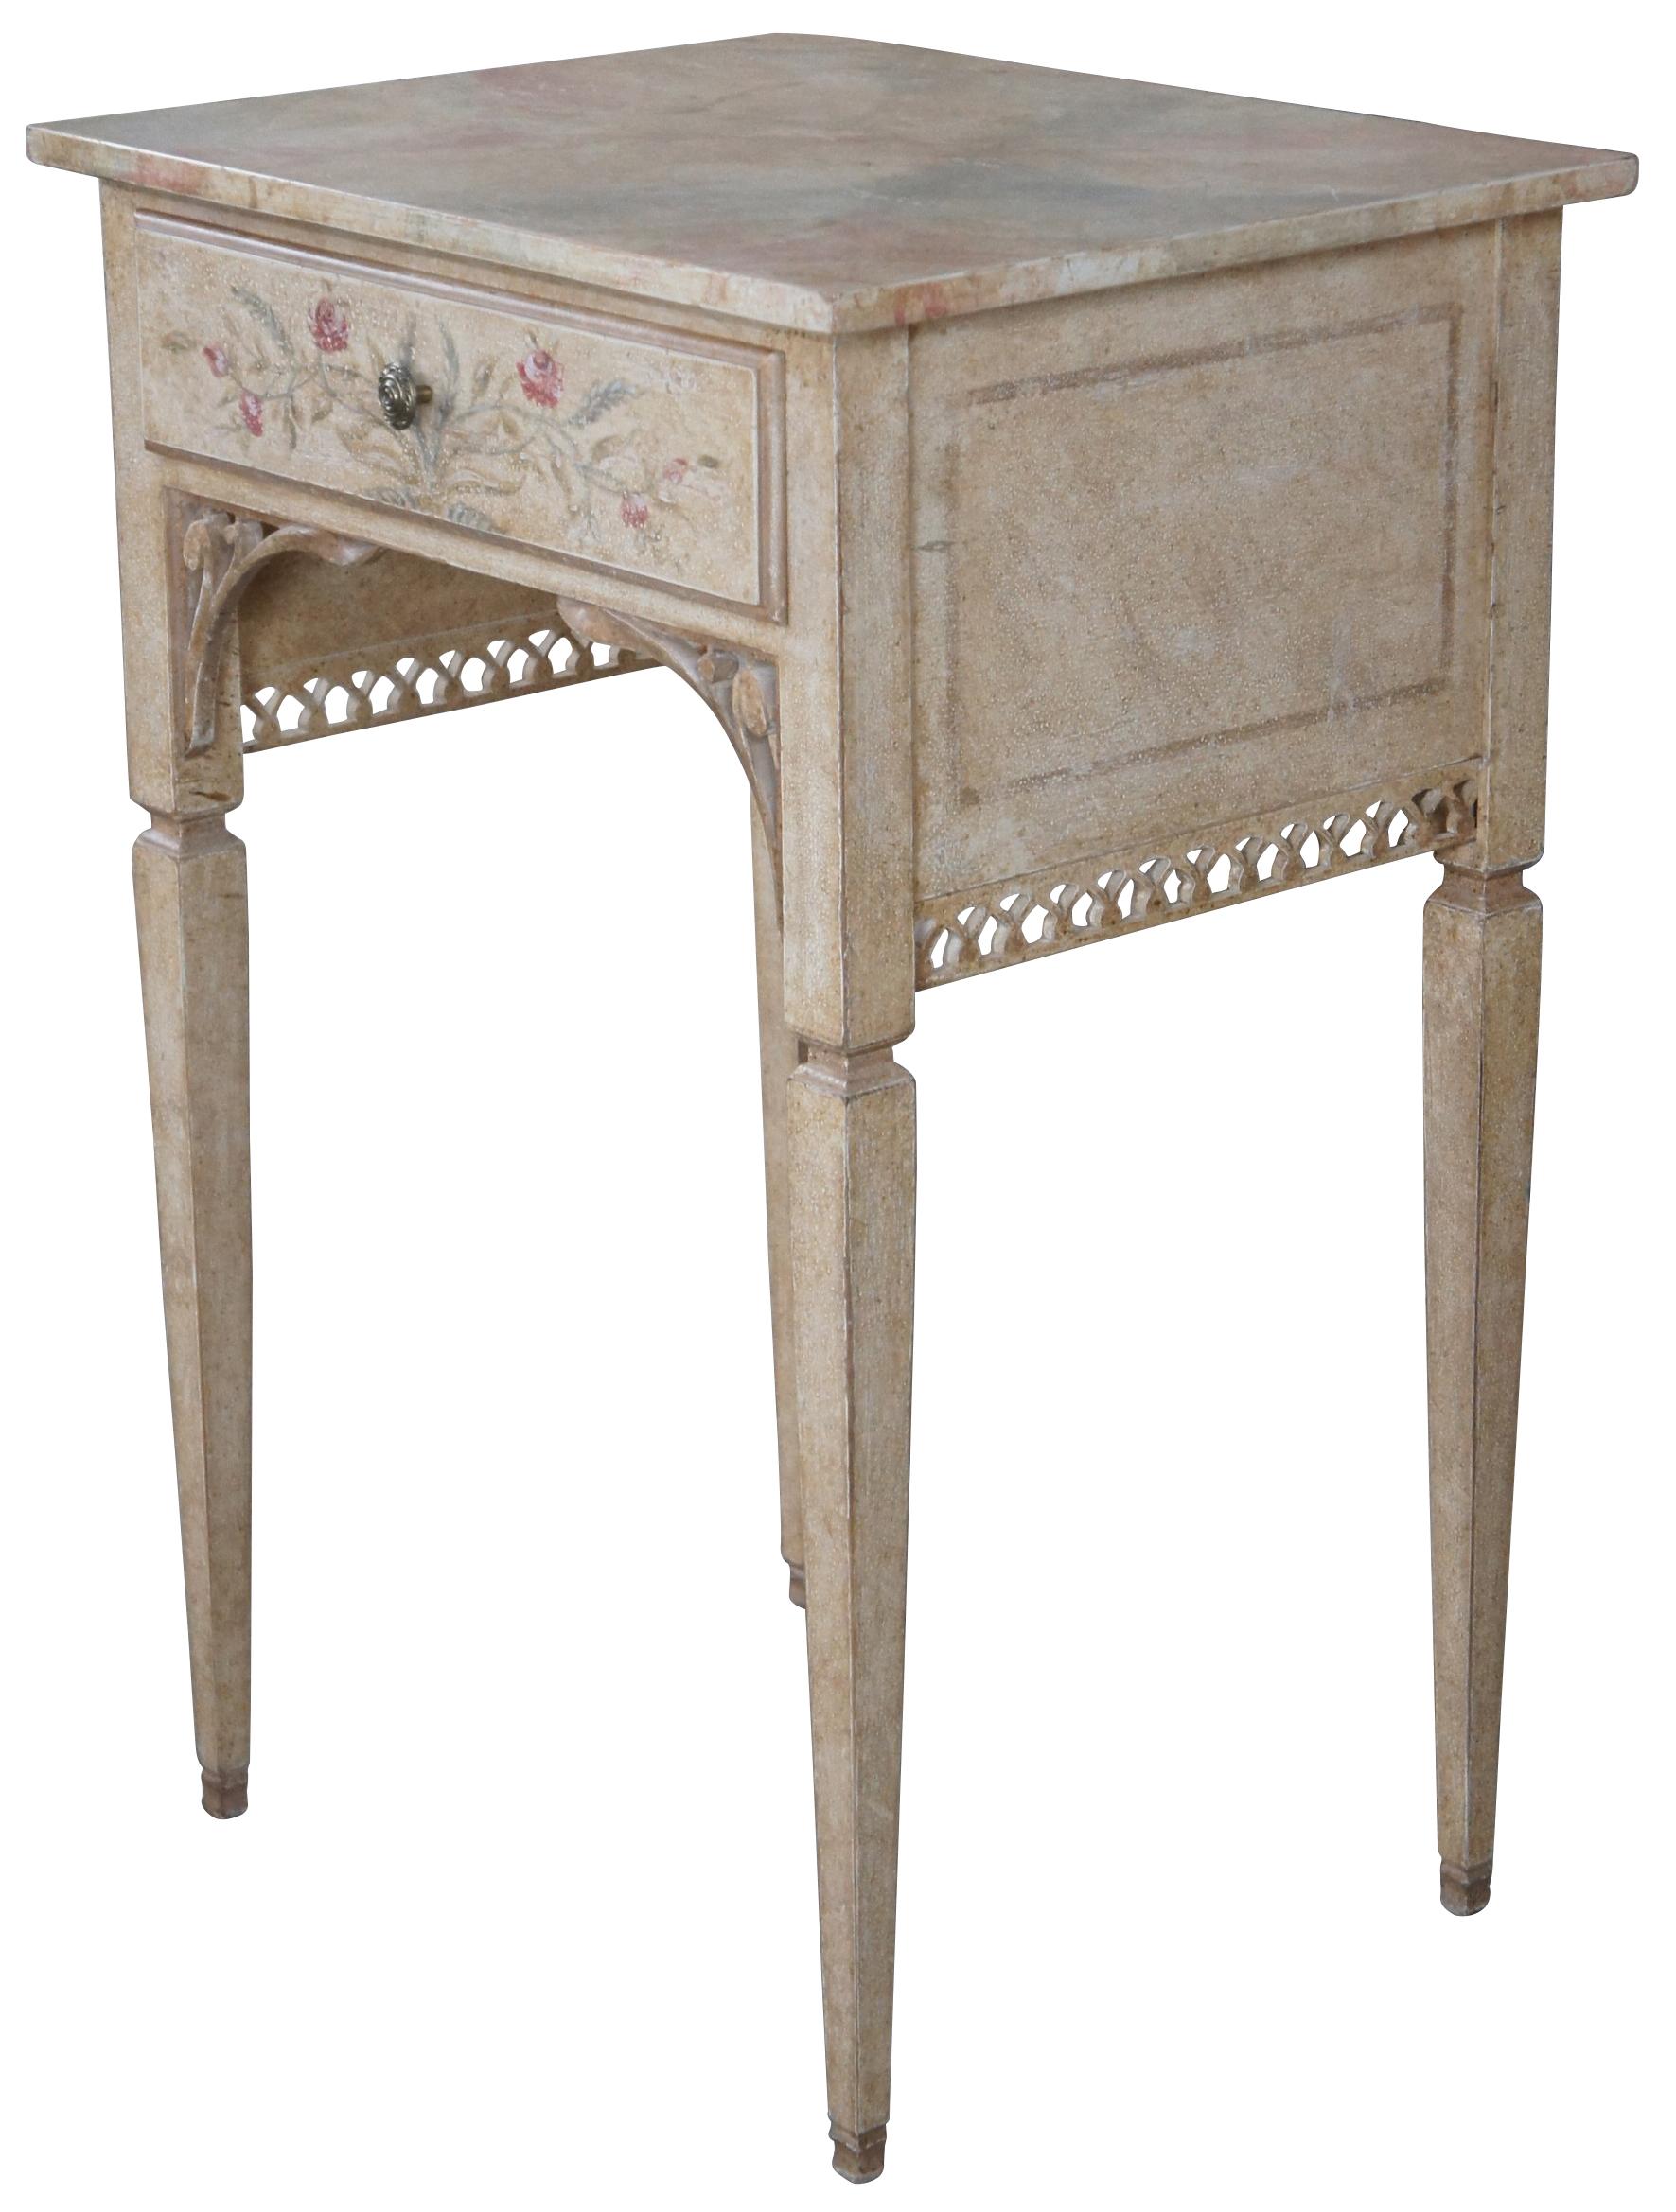 Auffray & Co hand painted French End Tables. Naturally distressed rectangular frame with drawer over pierced sprandles and trim. Supported by long square tapered legs.

Auffray & Co. was founded in Paris in the late 1800's and came to New York in